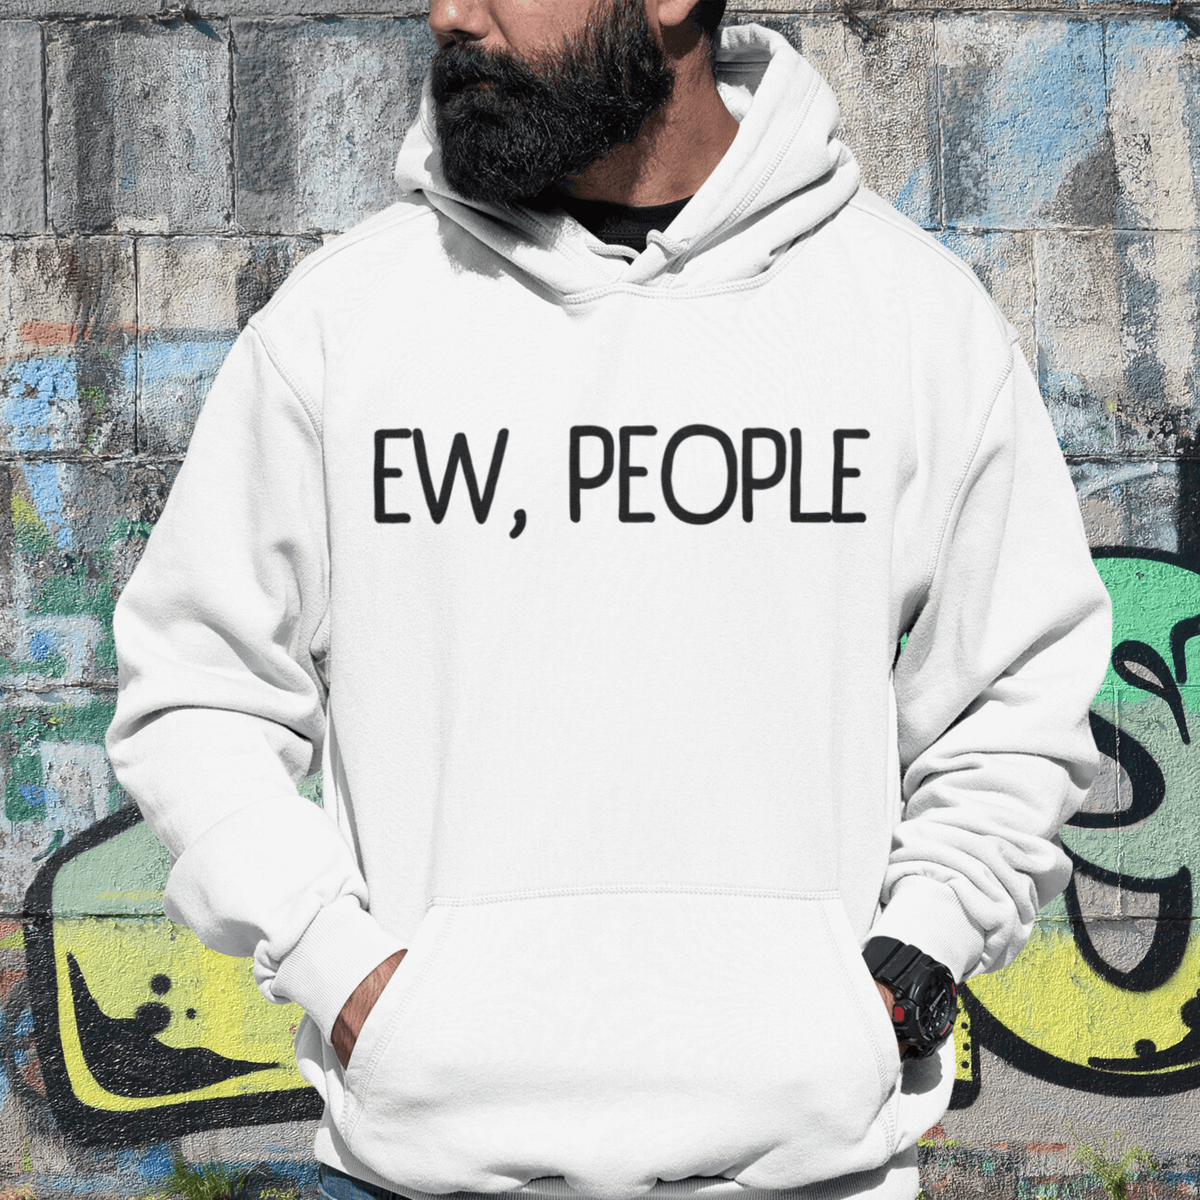 Hooded Sweatshirt, Funny Hoodie, Introvert Apparel, Humor Clothing, Statement Hoodie, Cozy Comfort, Quirky Fashion, Sassy Style, Casual Wear, Playful Prints, Personality Clothing, Witty Attire, Anti-Social Vibes, Relaxed Fit, Introvert Pride, Lighthearted Layers, Conversational Hoodie, Solitude Fashion, Unique Statements, Weekend Lounge, Attitude Attire, Chill Outfits, ew people, ew people hoodie, ew people tee